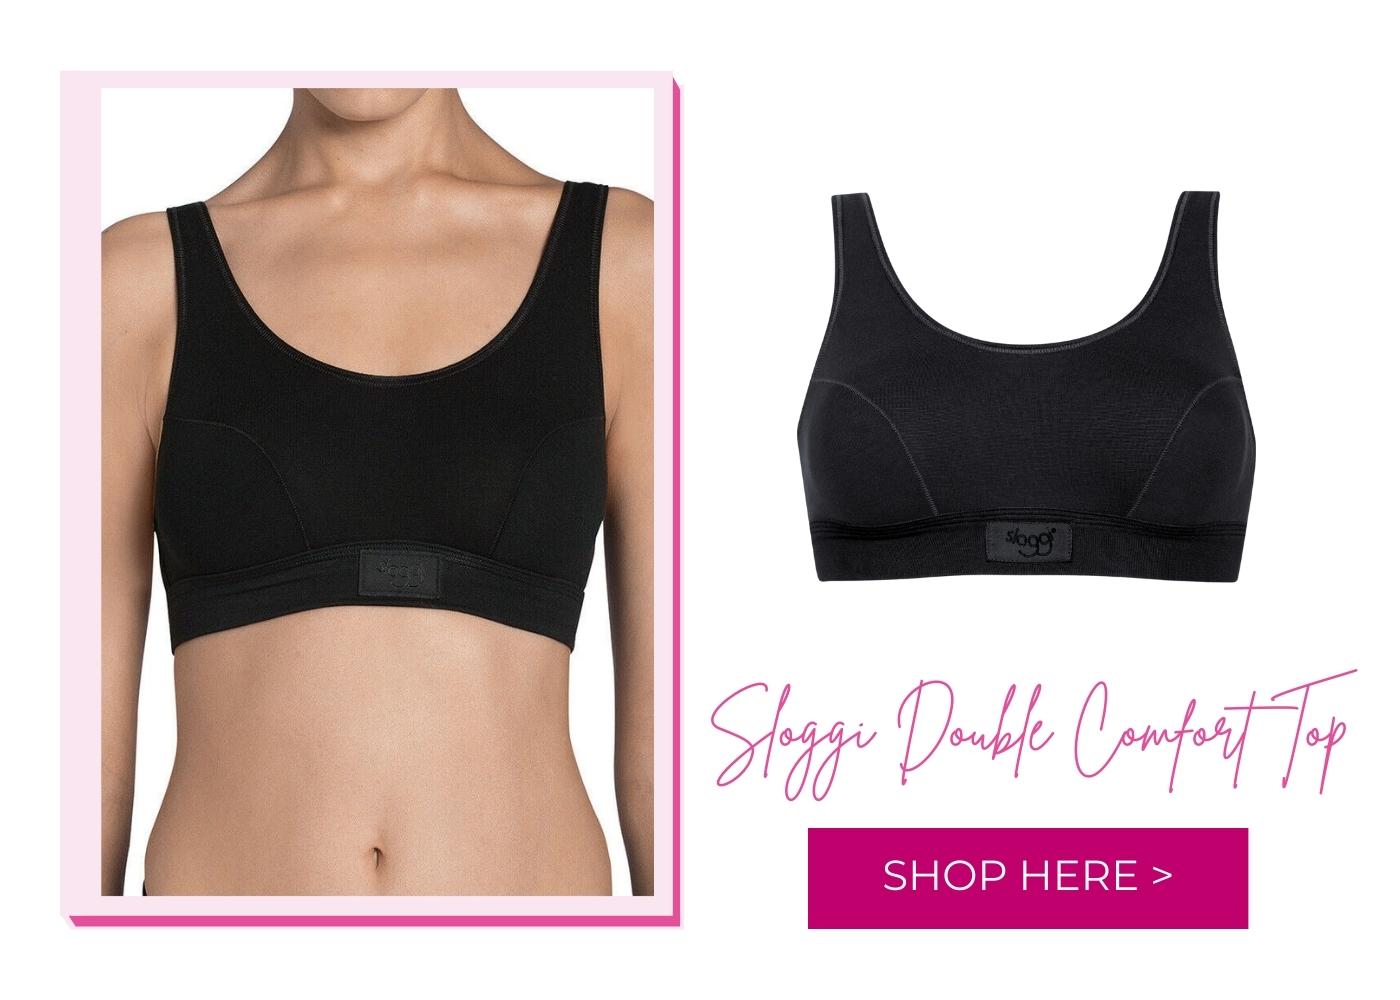 Sleep Bra is Answer to The Question if You Should Sleep Wearing a Bra